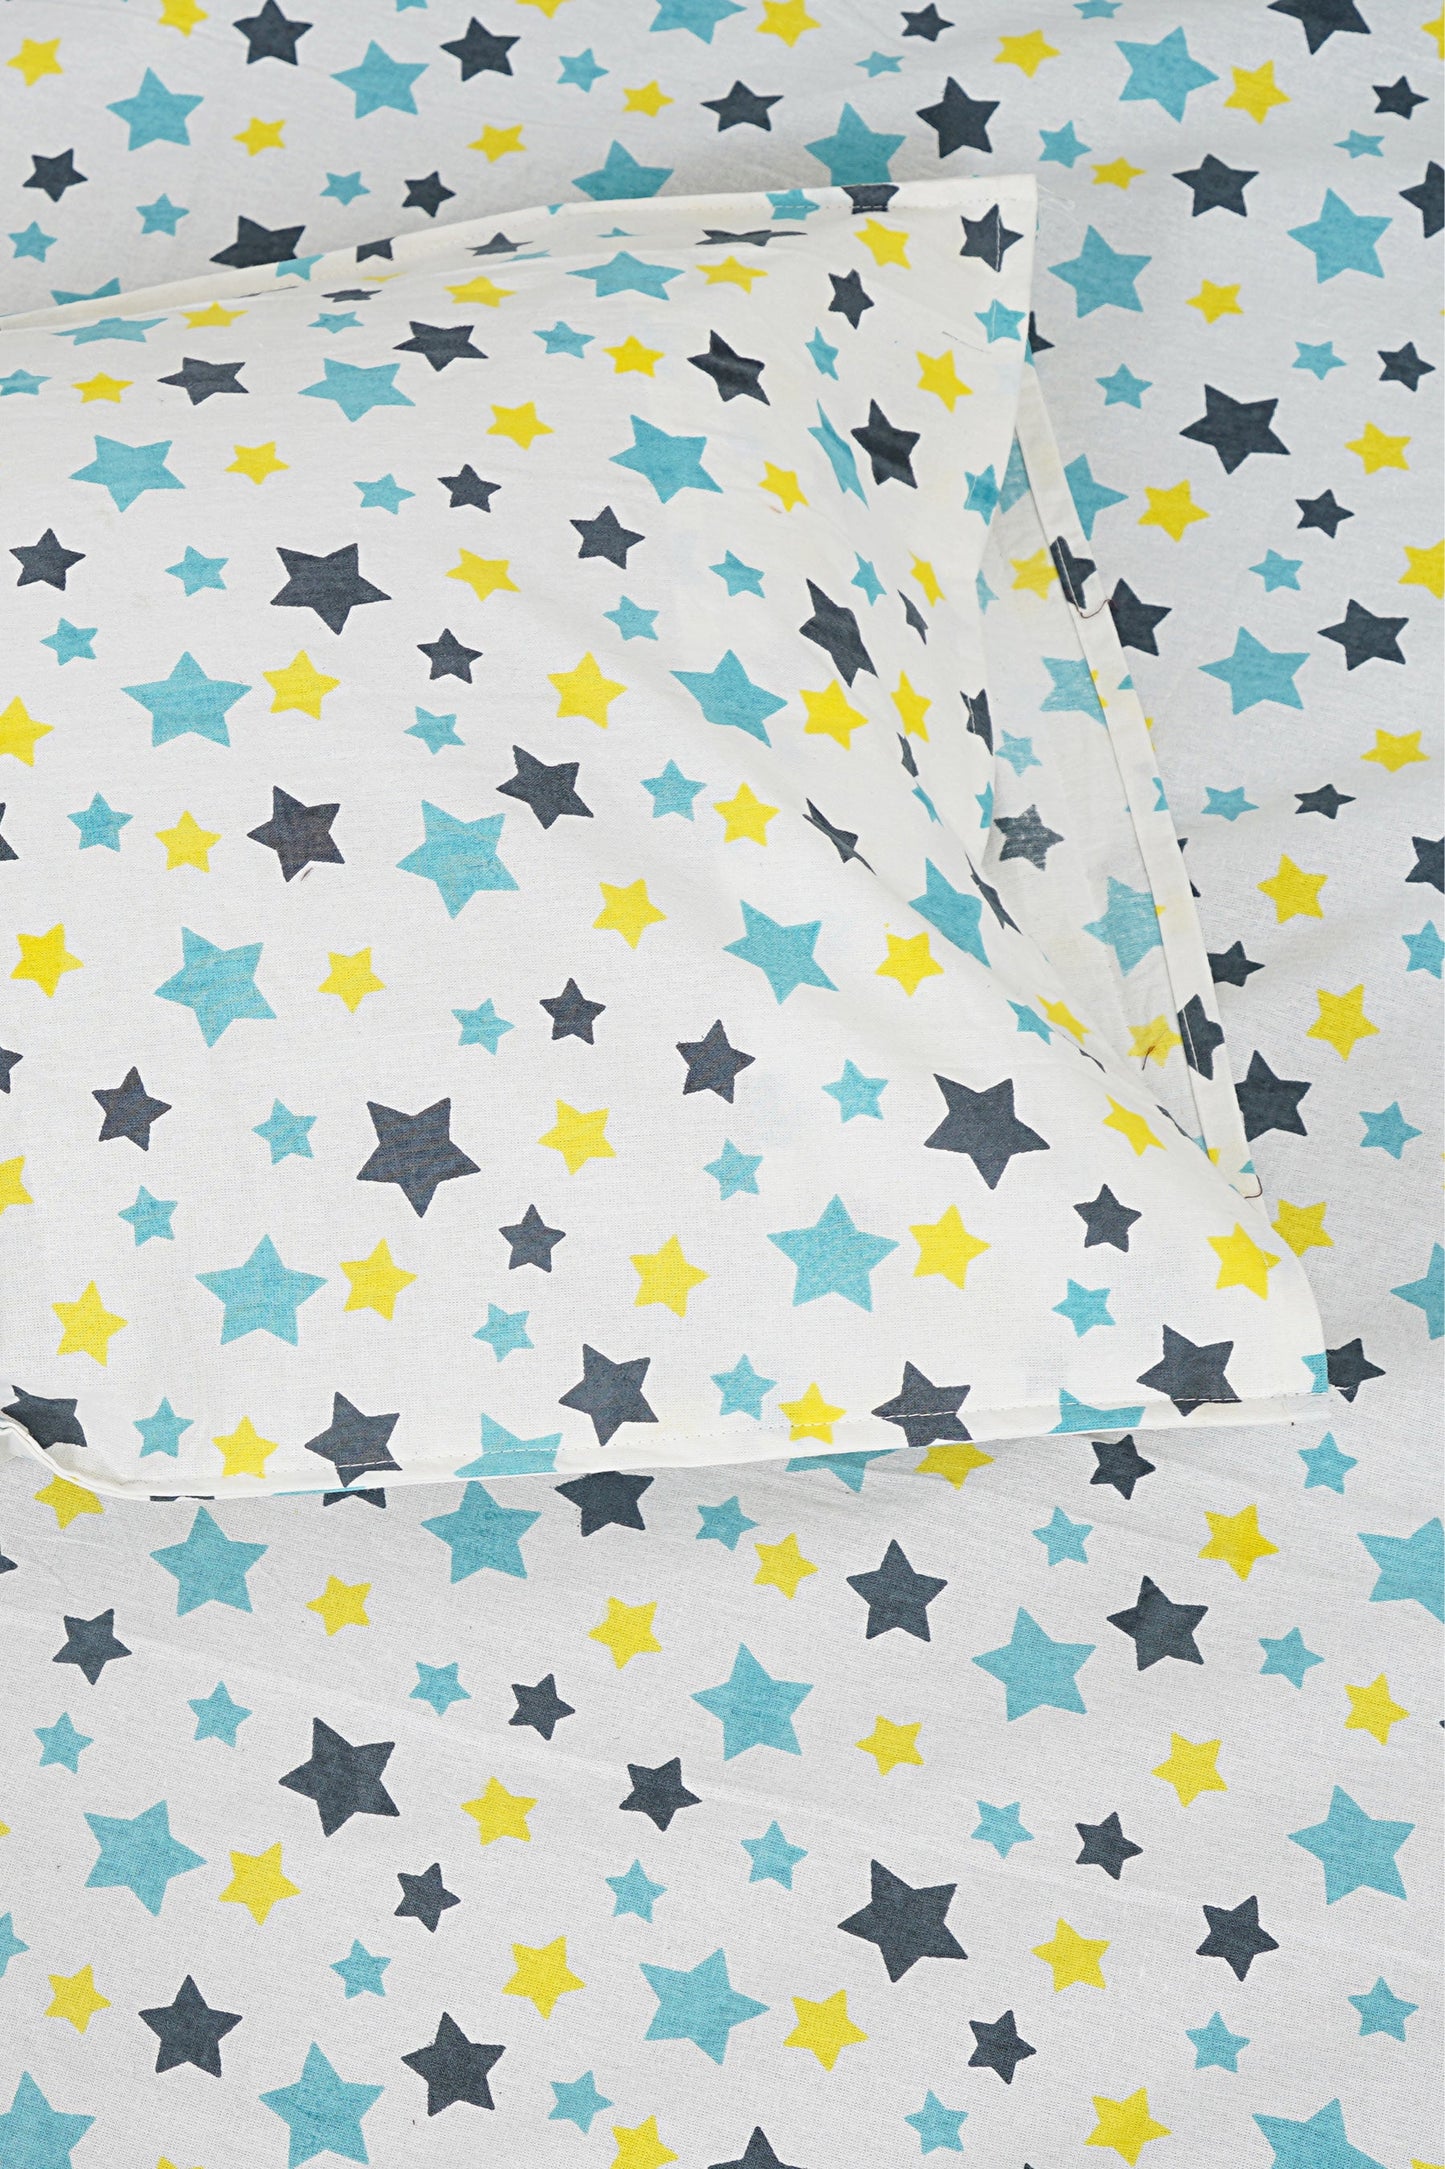 Kids Cotton Bedroom Linens - Double Sheet with 2 Pillow Covers in Black Star Print - King Size Bed